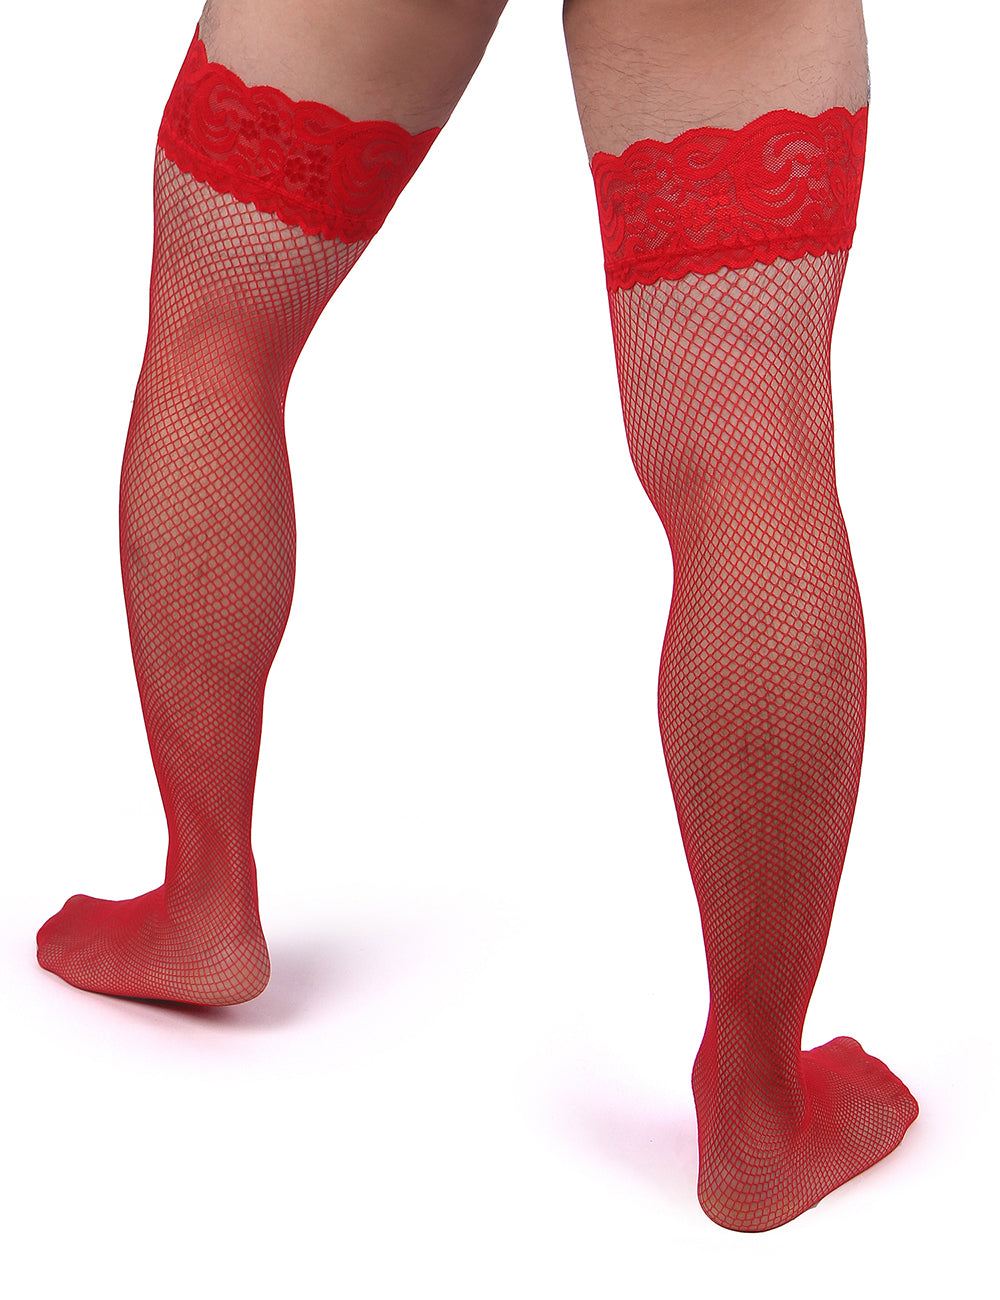 JCSTK - Unisex Fishnet Lace Top Stockings, Strong for Our Males to Wear! Red